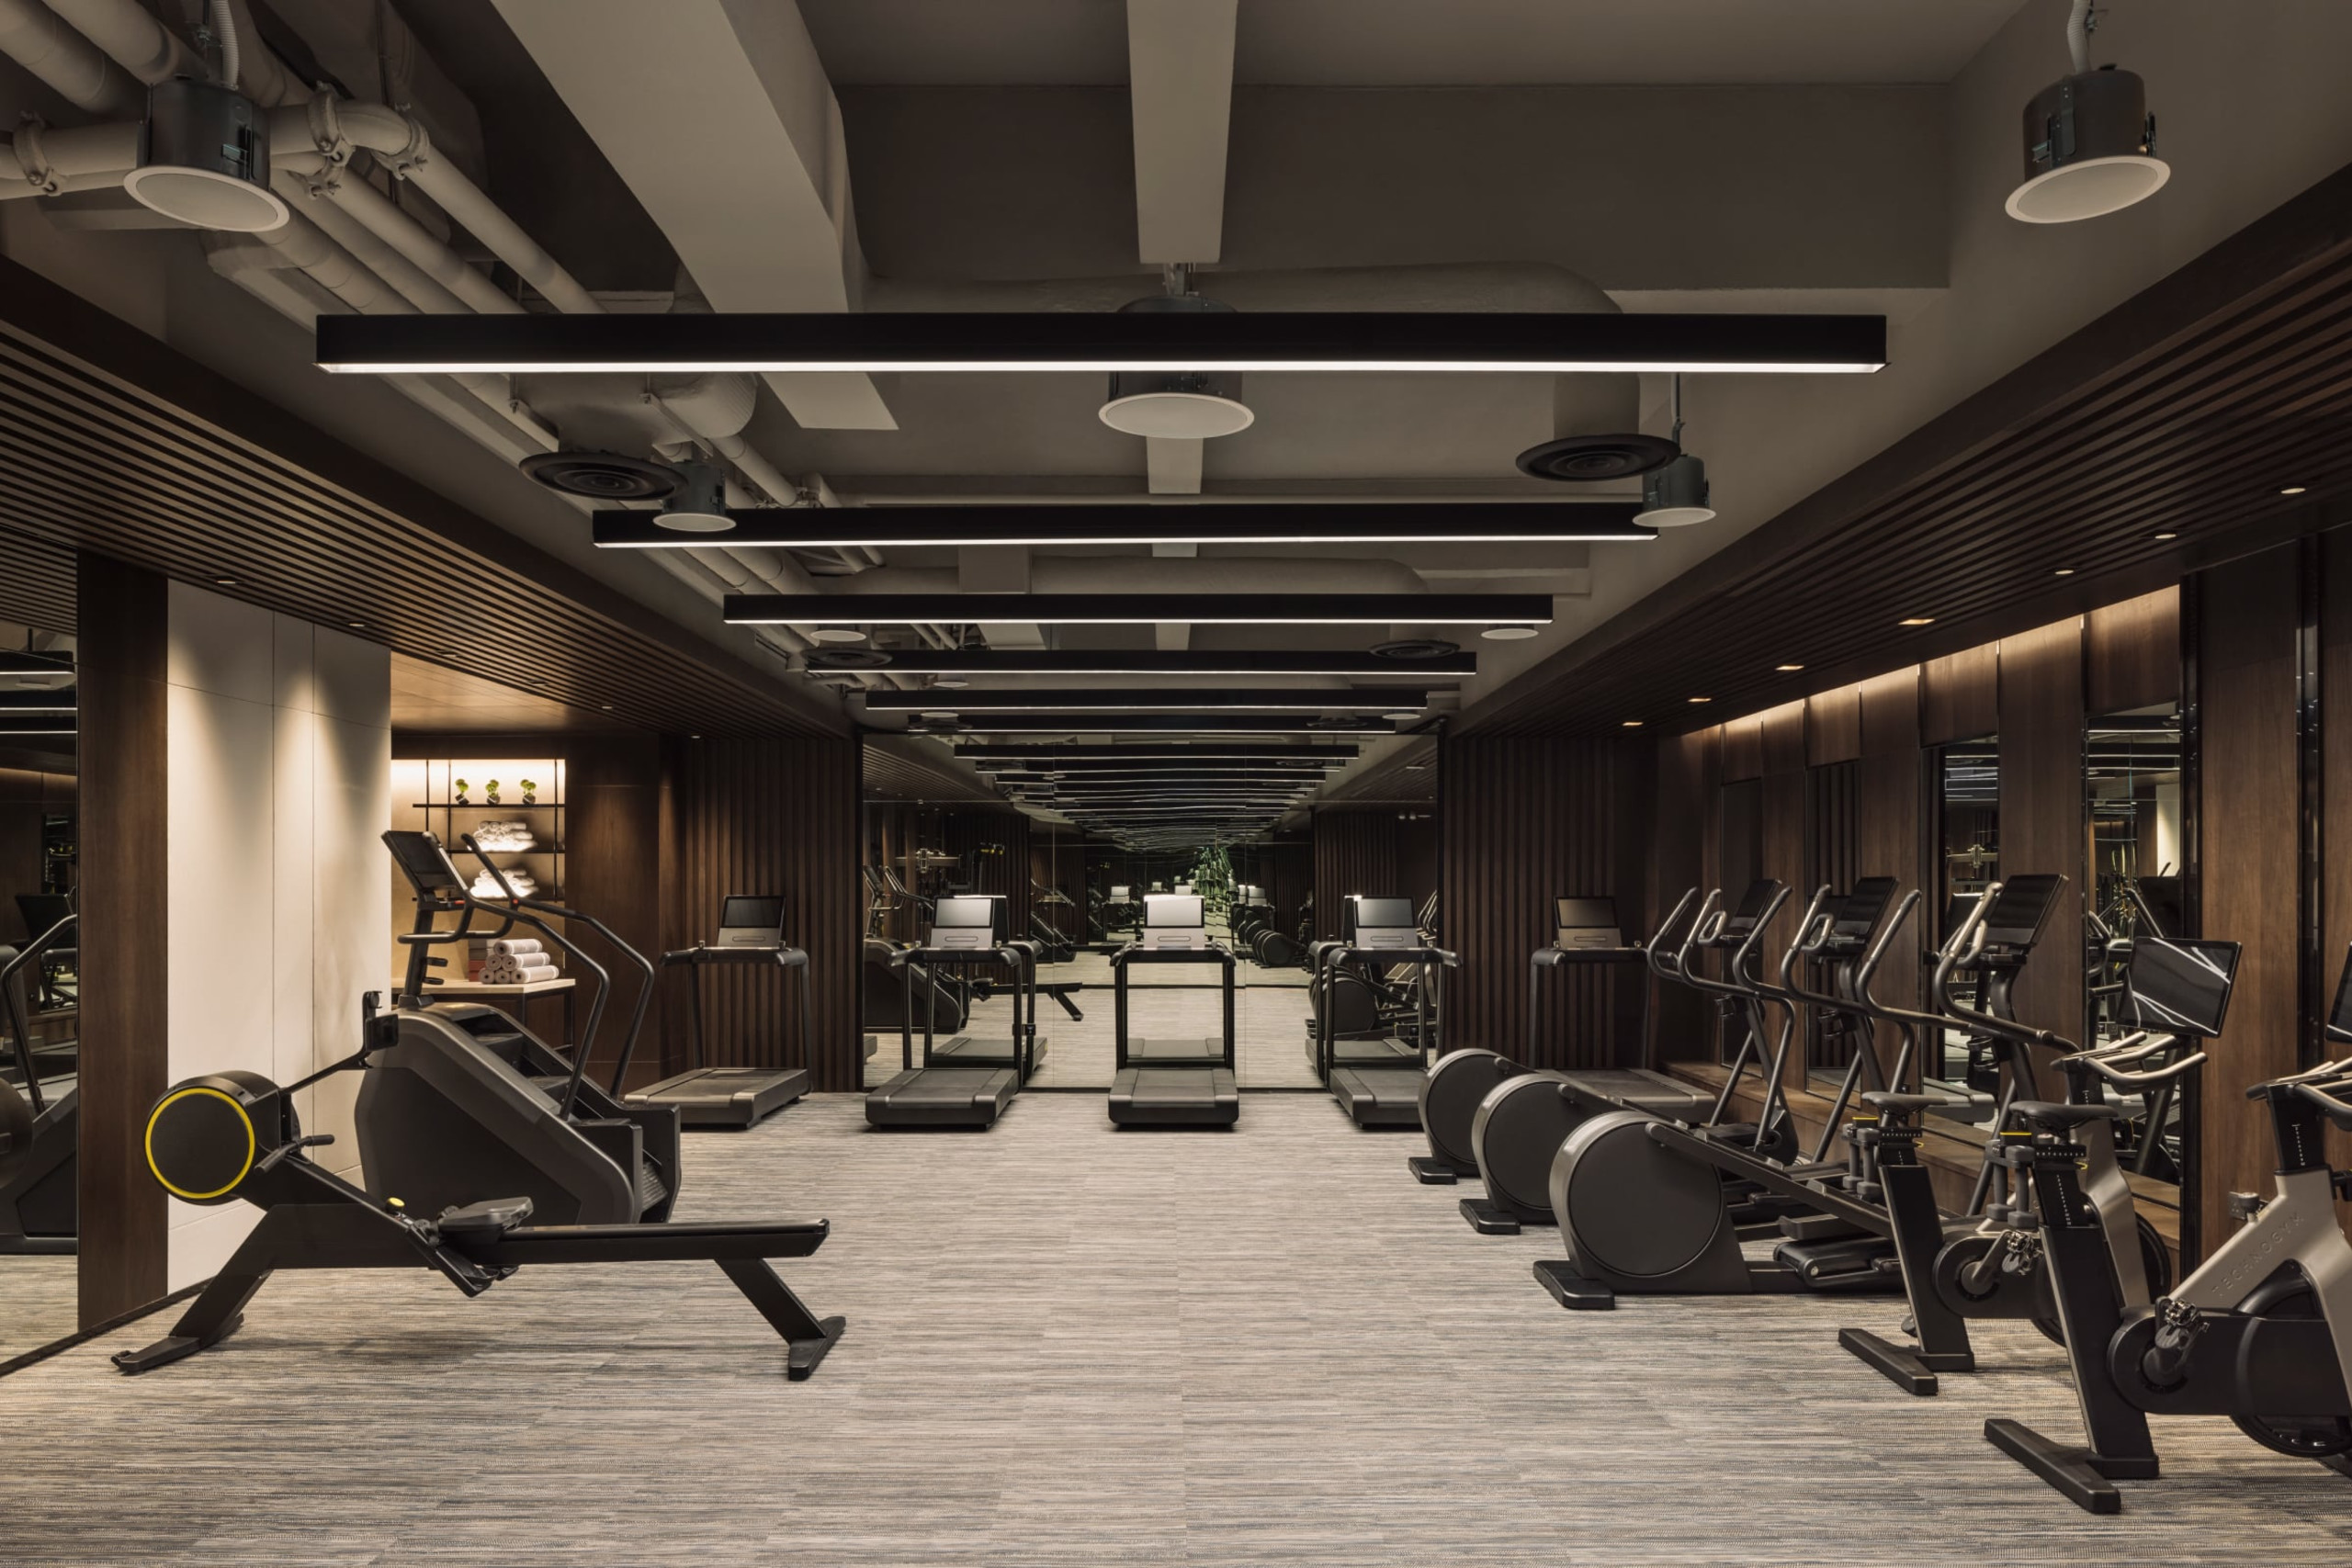 Large fitness room with modern fitness equipment.